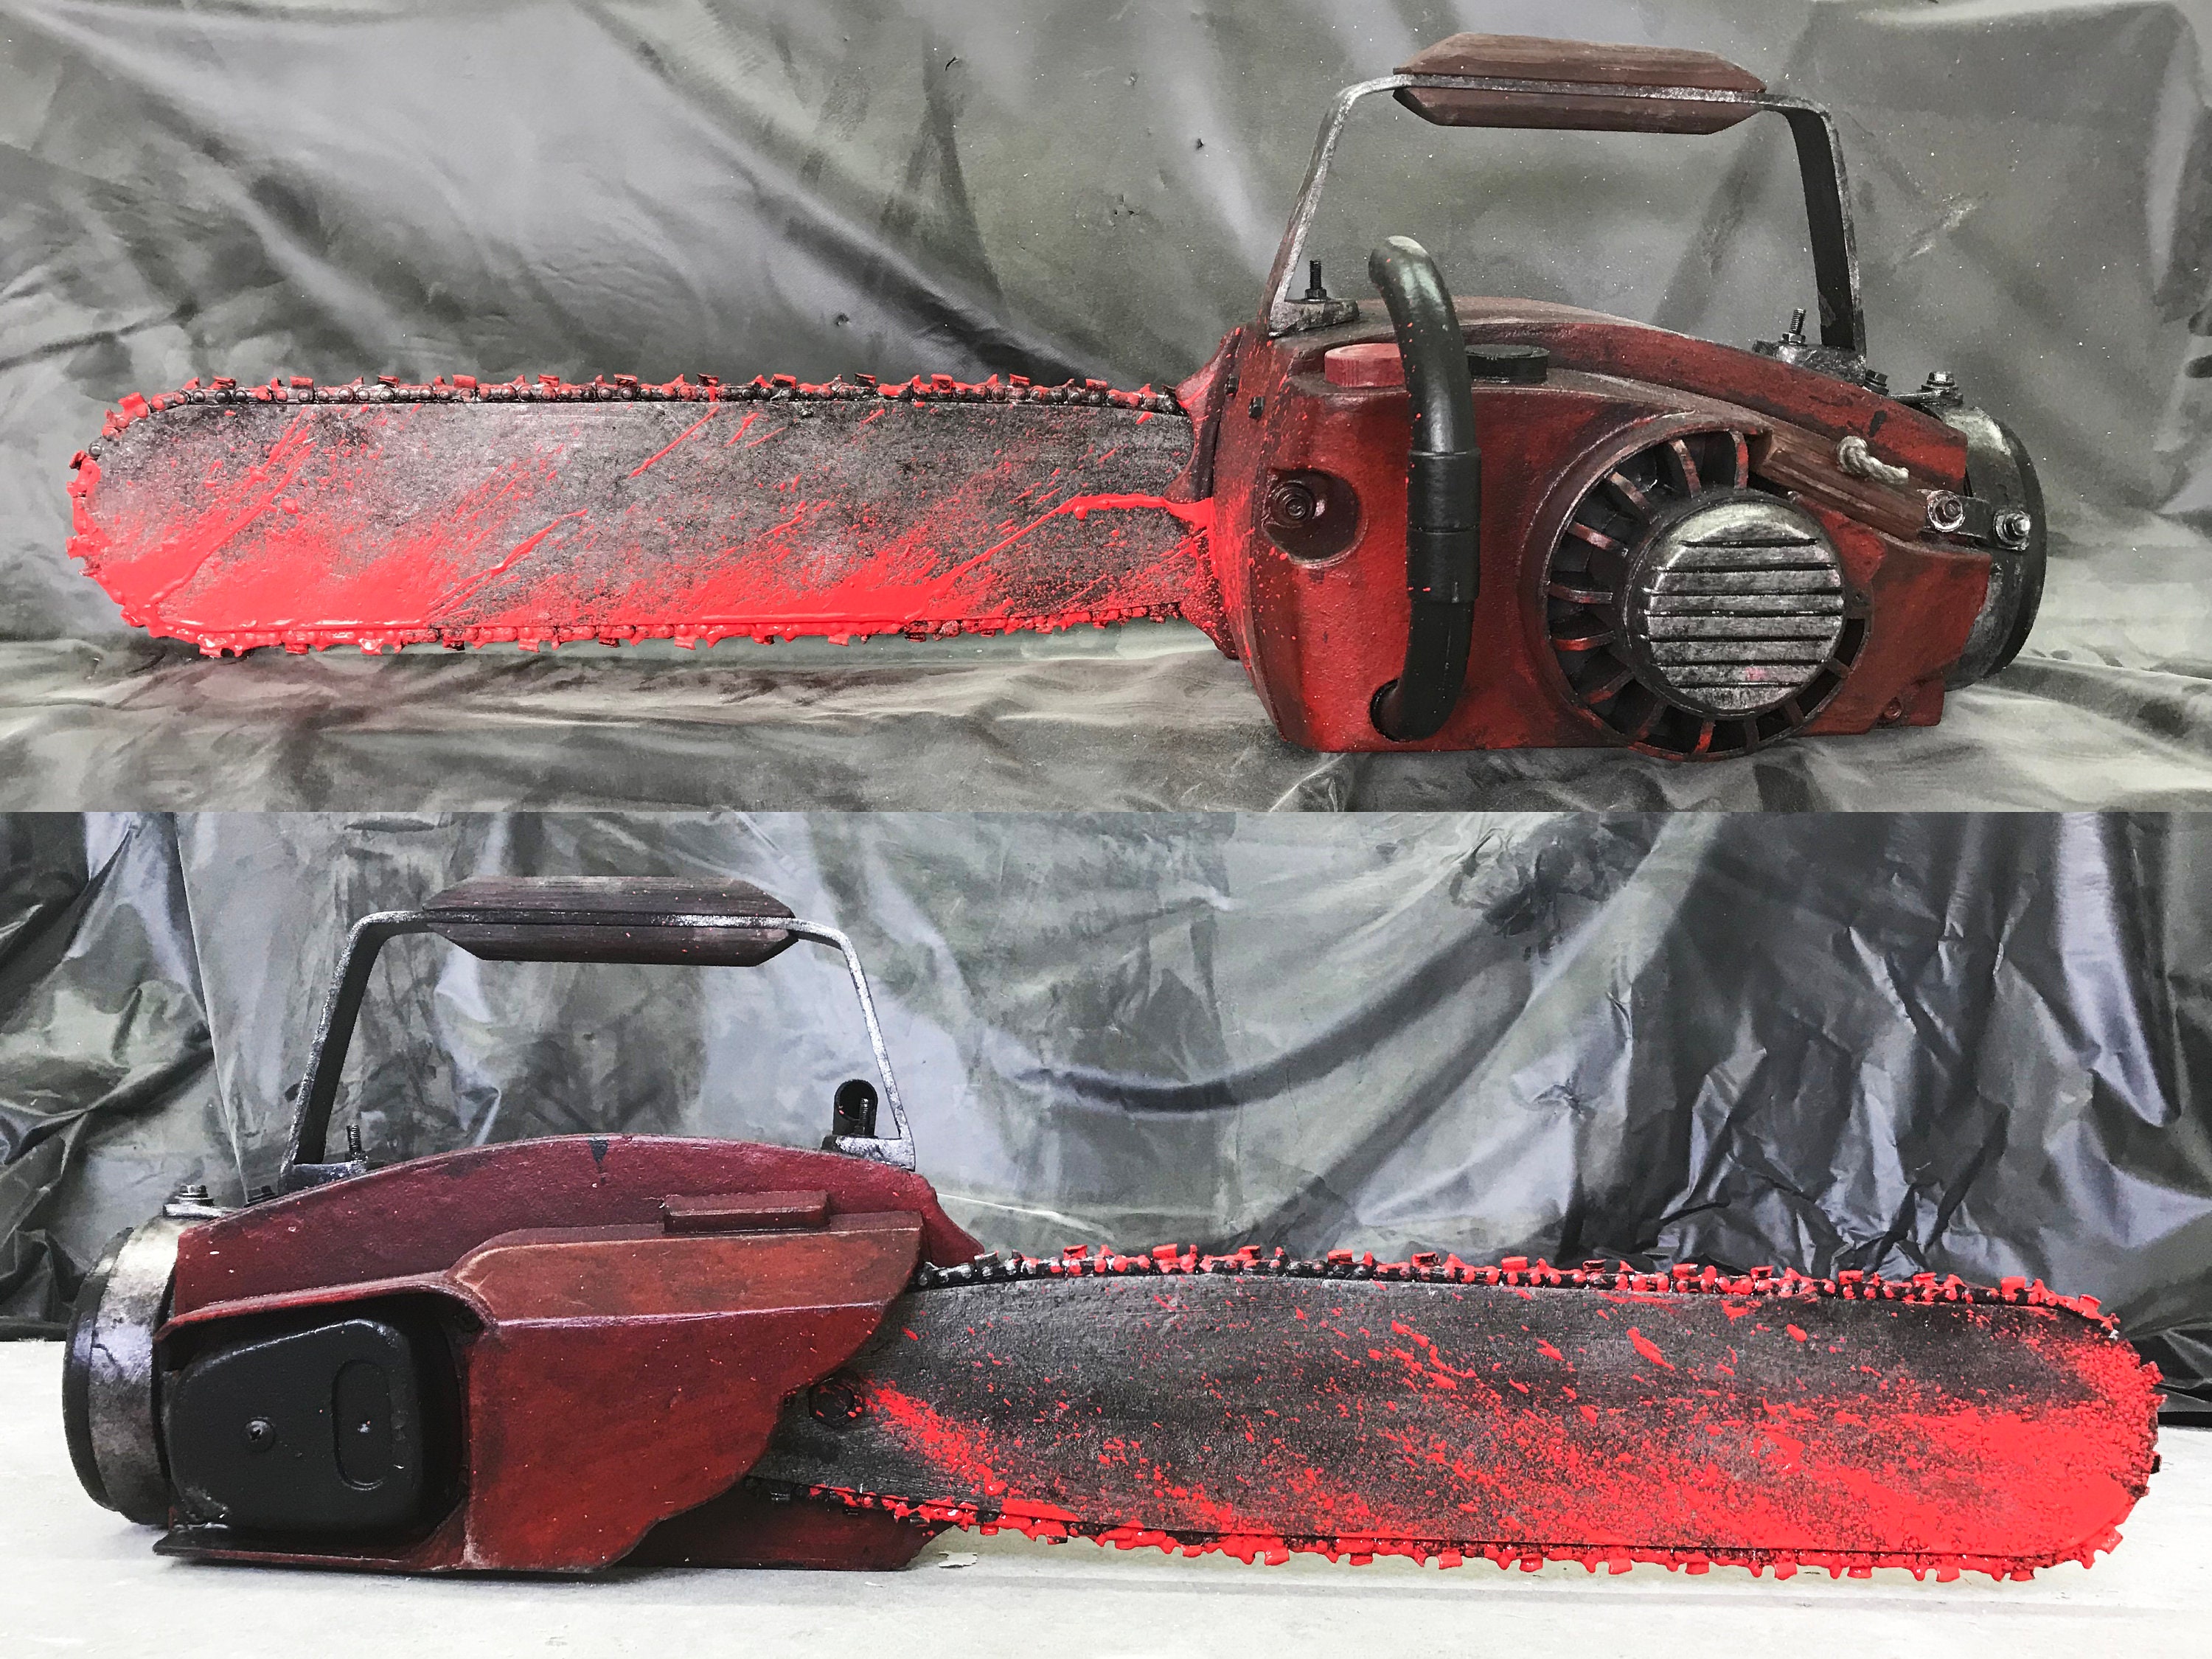 Syndicate Collectibles Teases a Full Size Replica of Ash's Chainsaw Hand from  the 'Evil Dead' Movies! - Bloody Disgusting